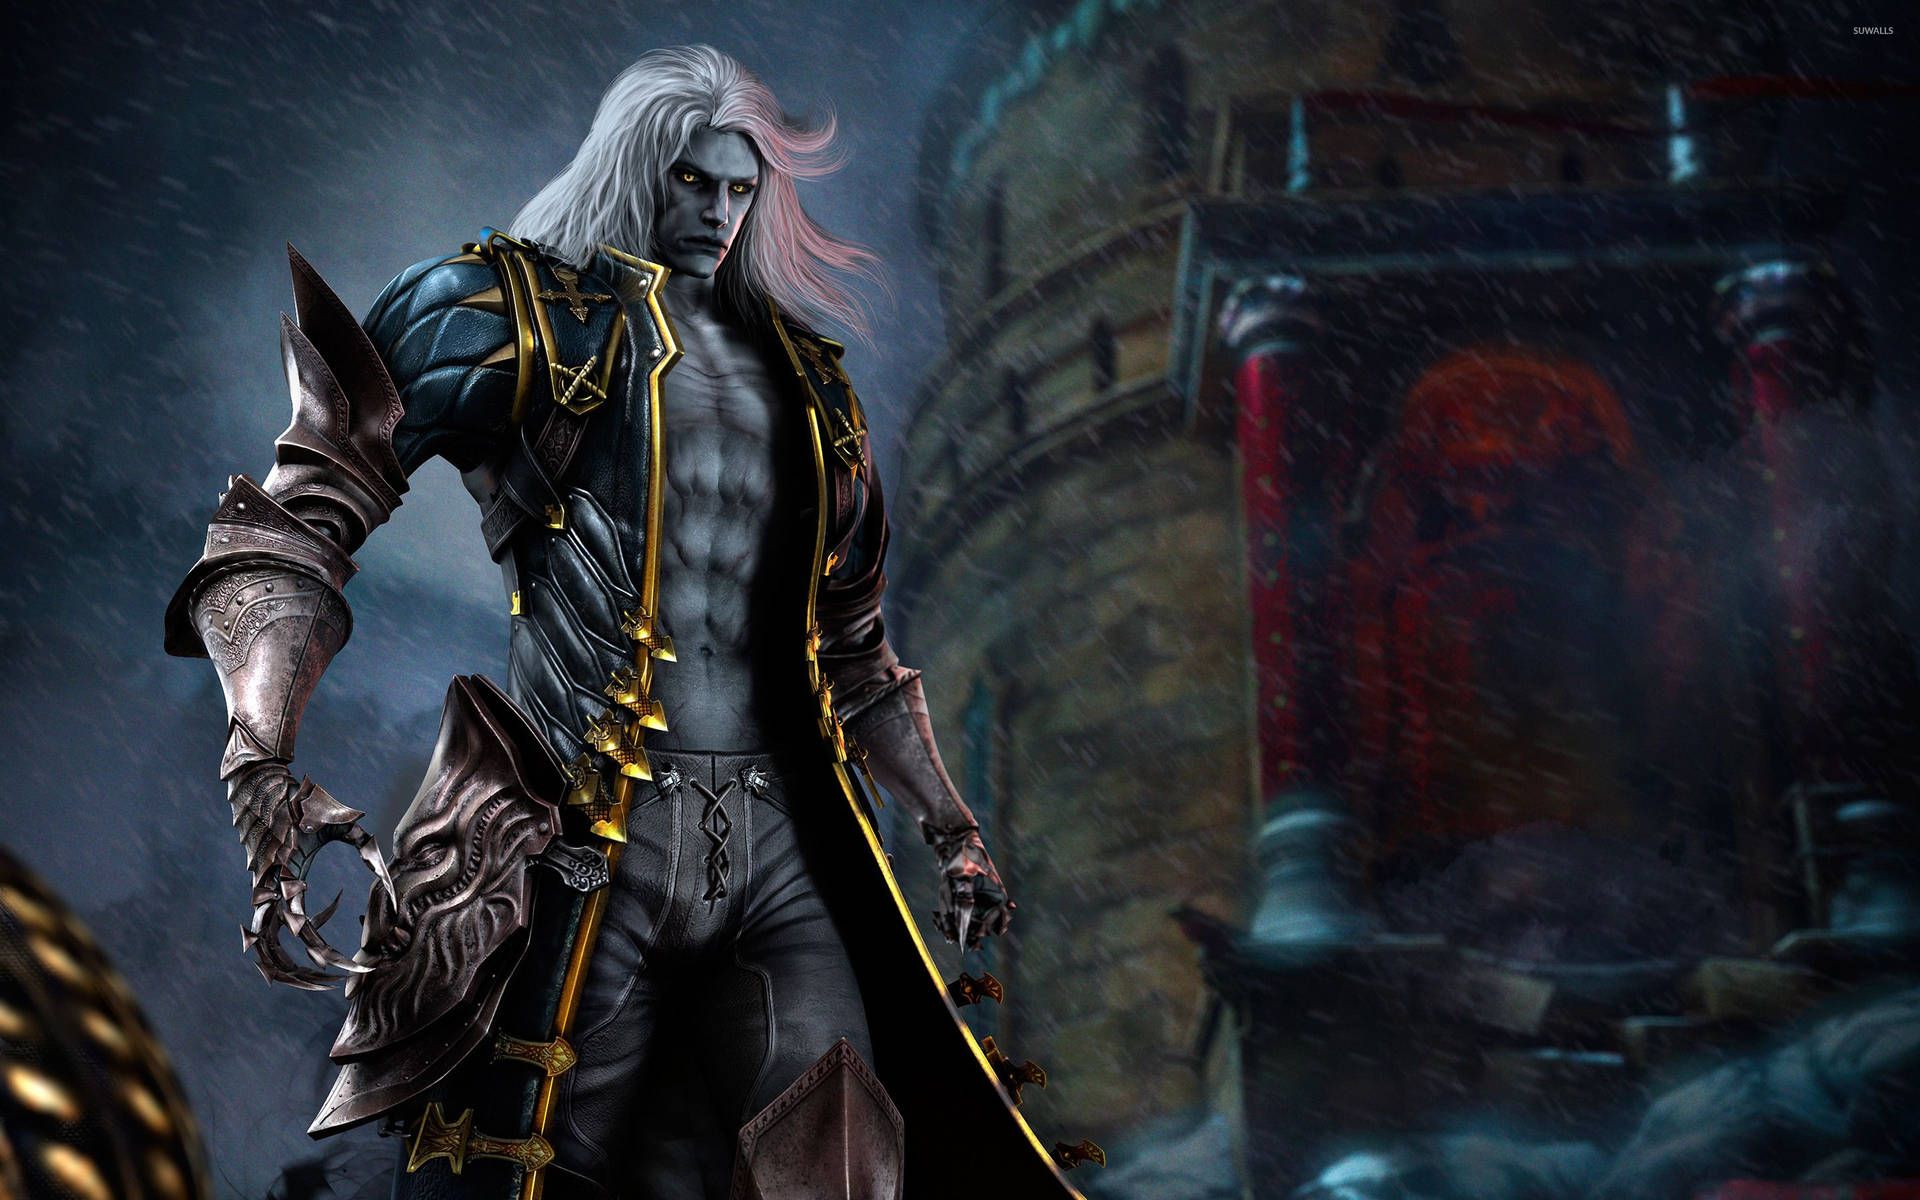  Castlevania Hintergrundbild 1920x1200. Download “Alucard fights against his own darkness at the gates of Castlevania” Wallpaper